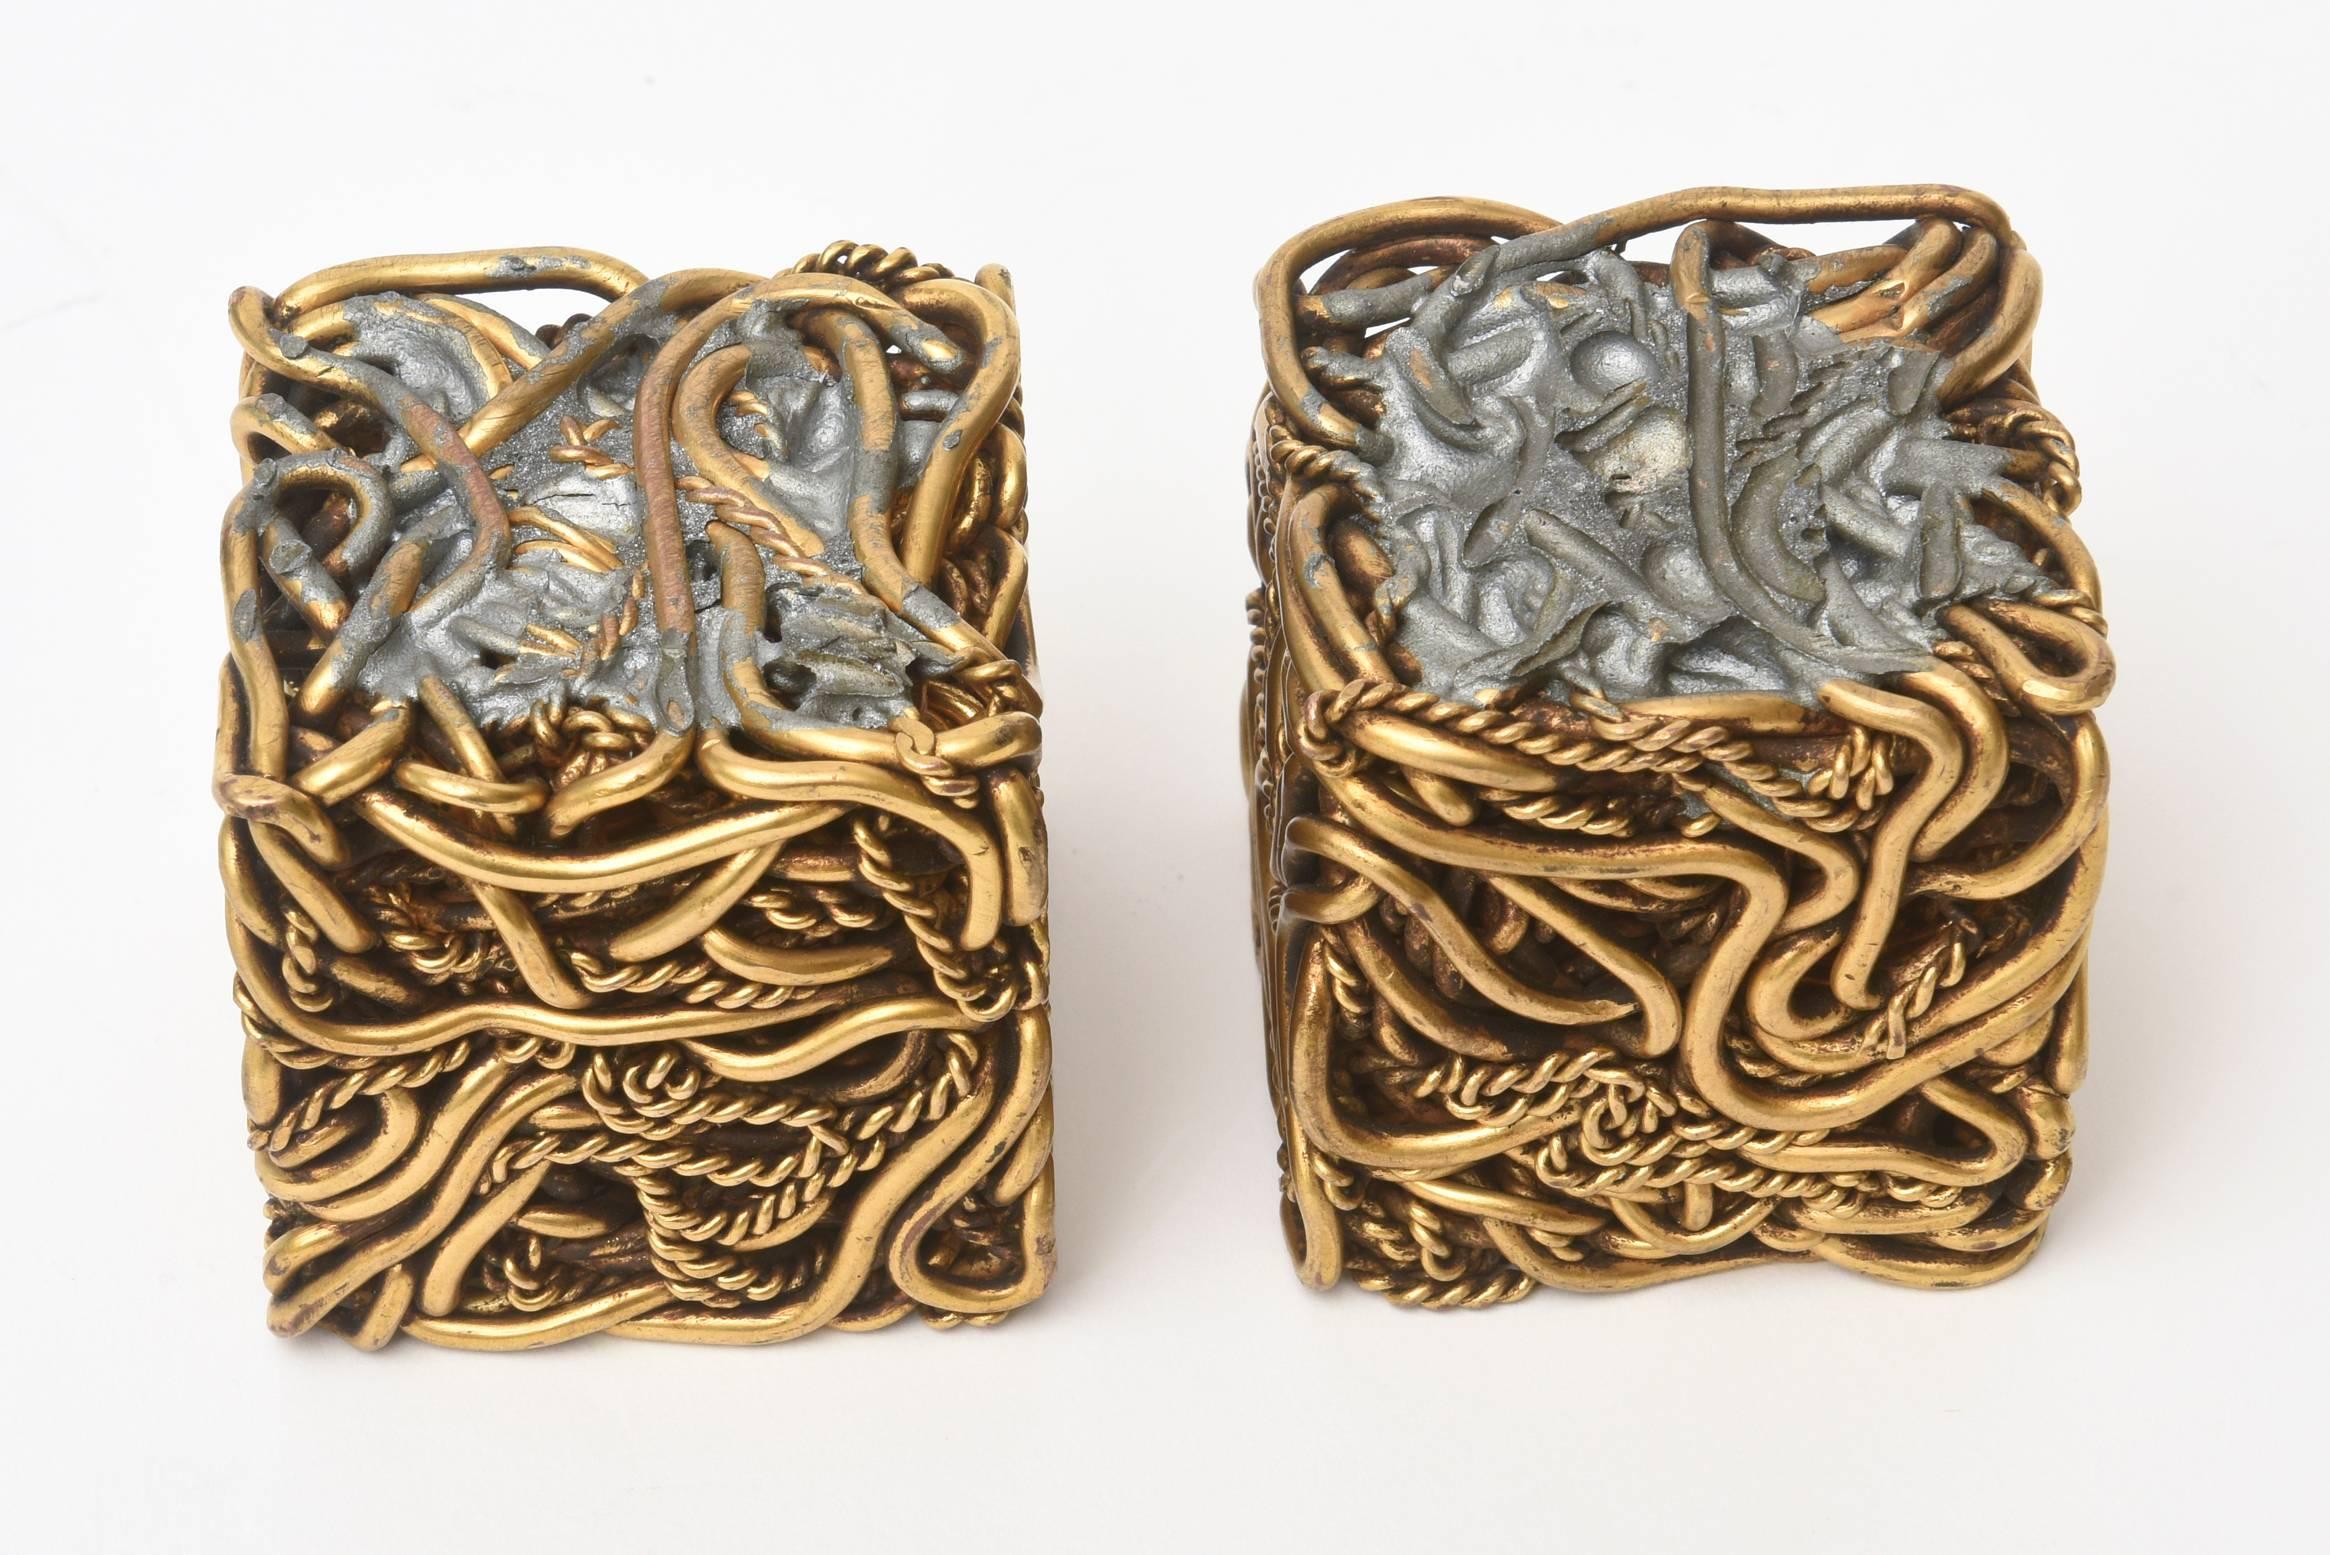  Yascal Signed Vintage French Bronze Twisted Square Cube Sculptures Pair For Sale 4